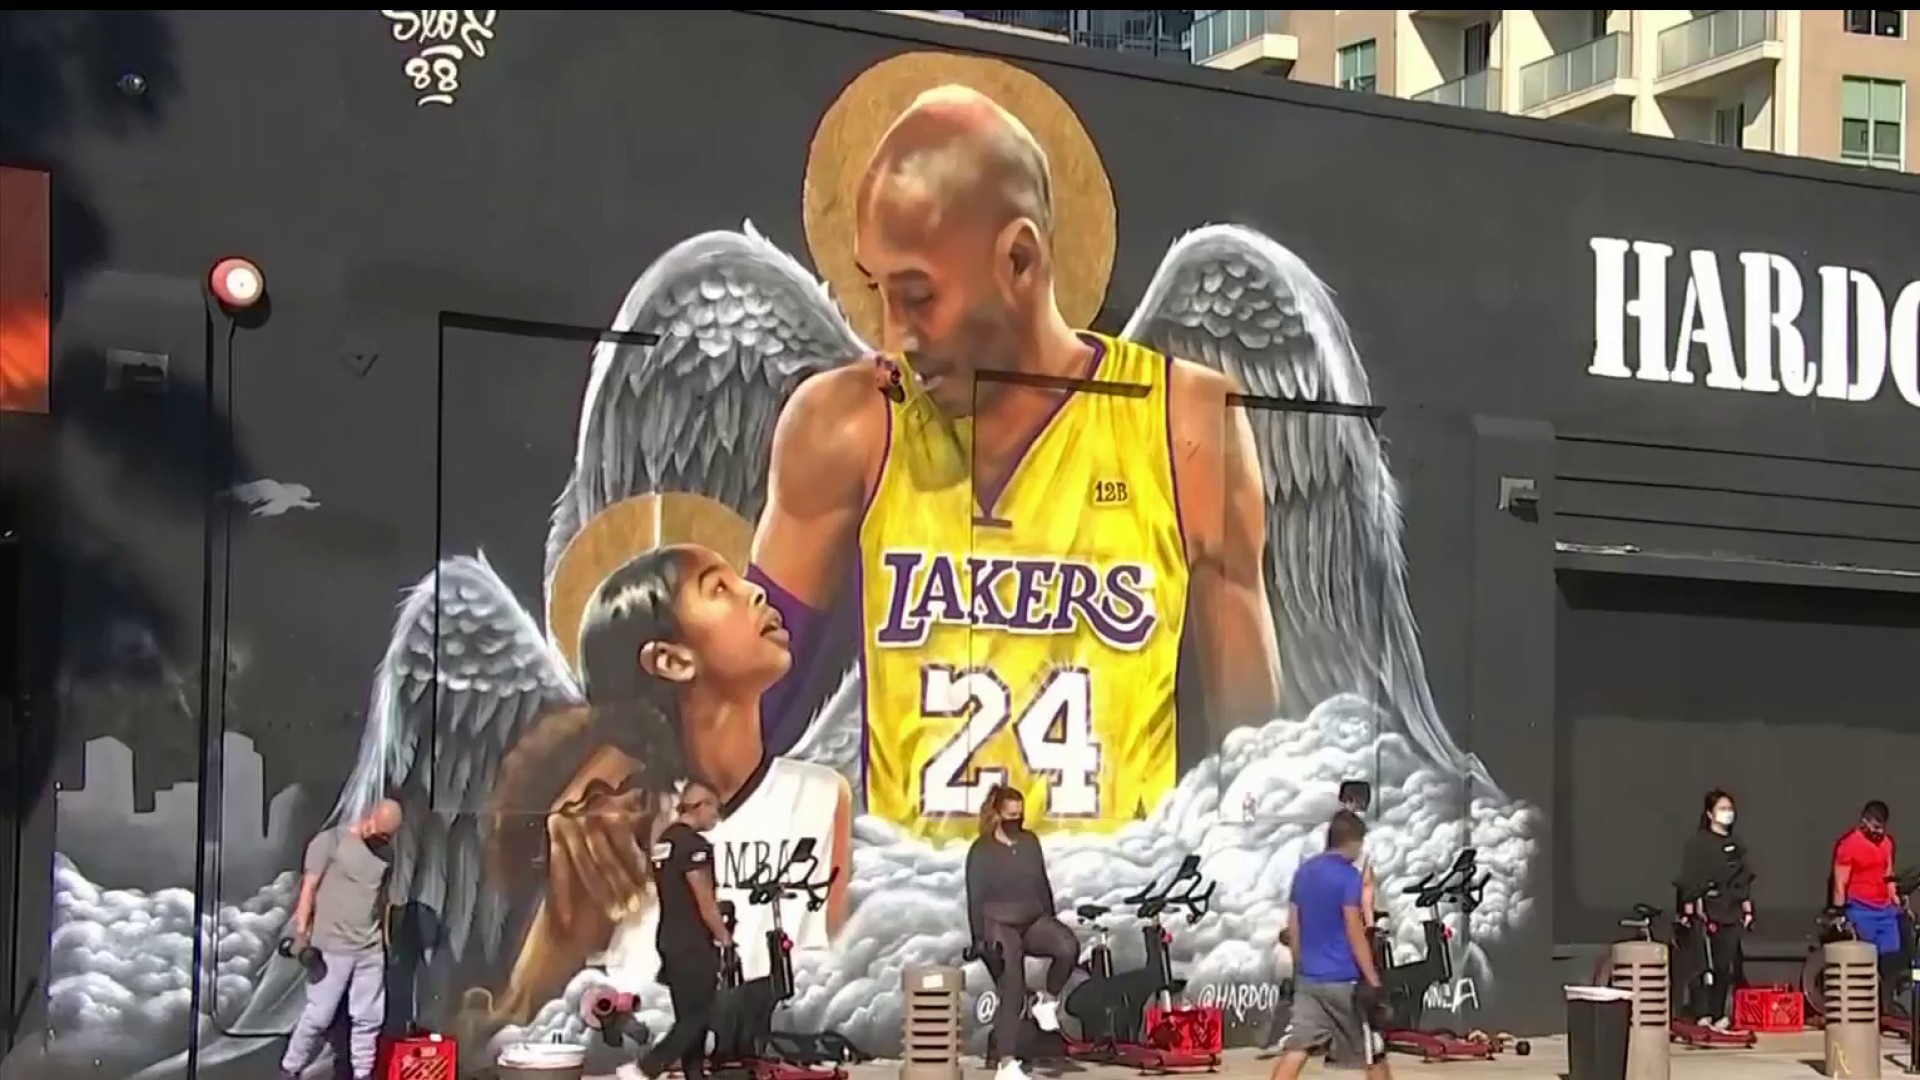 Kobe & Gianna Bryant Murals on X: The Kobe Bryant hardwood classic jersey  Carved entirely by hand from a single block of wood 👀   / X